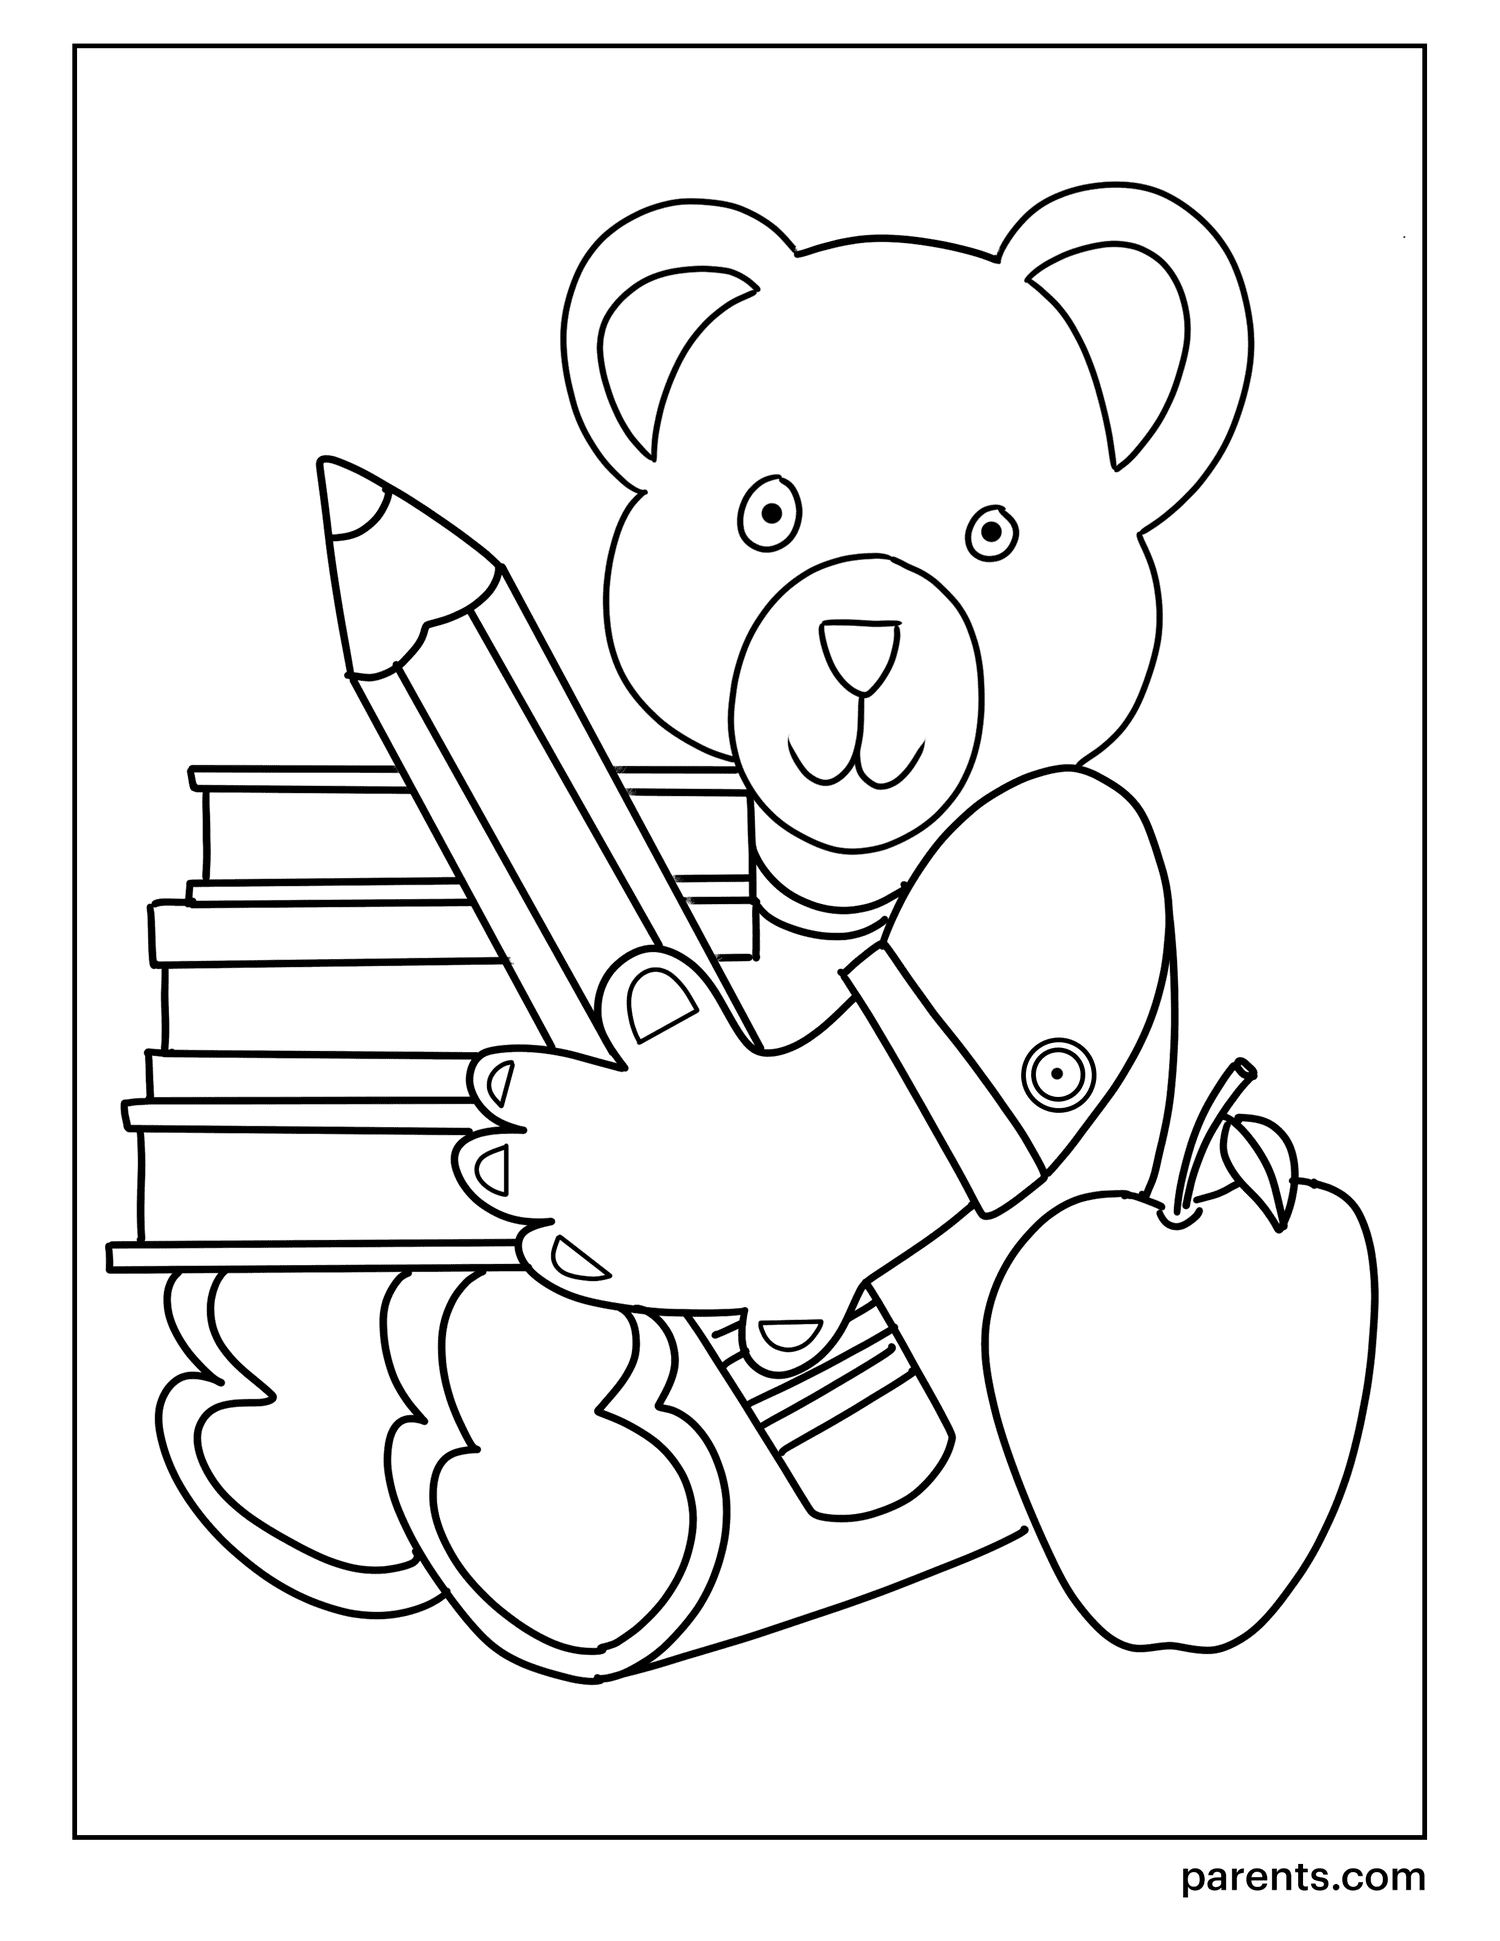 10-printable-back-to-school-coloring-pages-for-kids